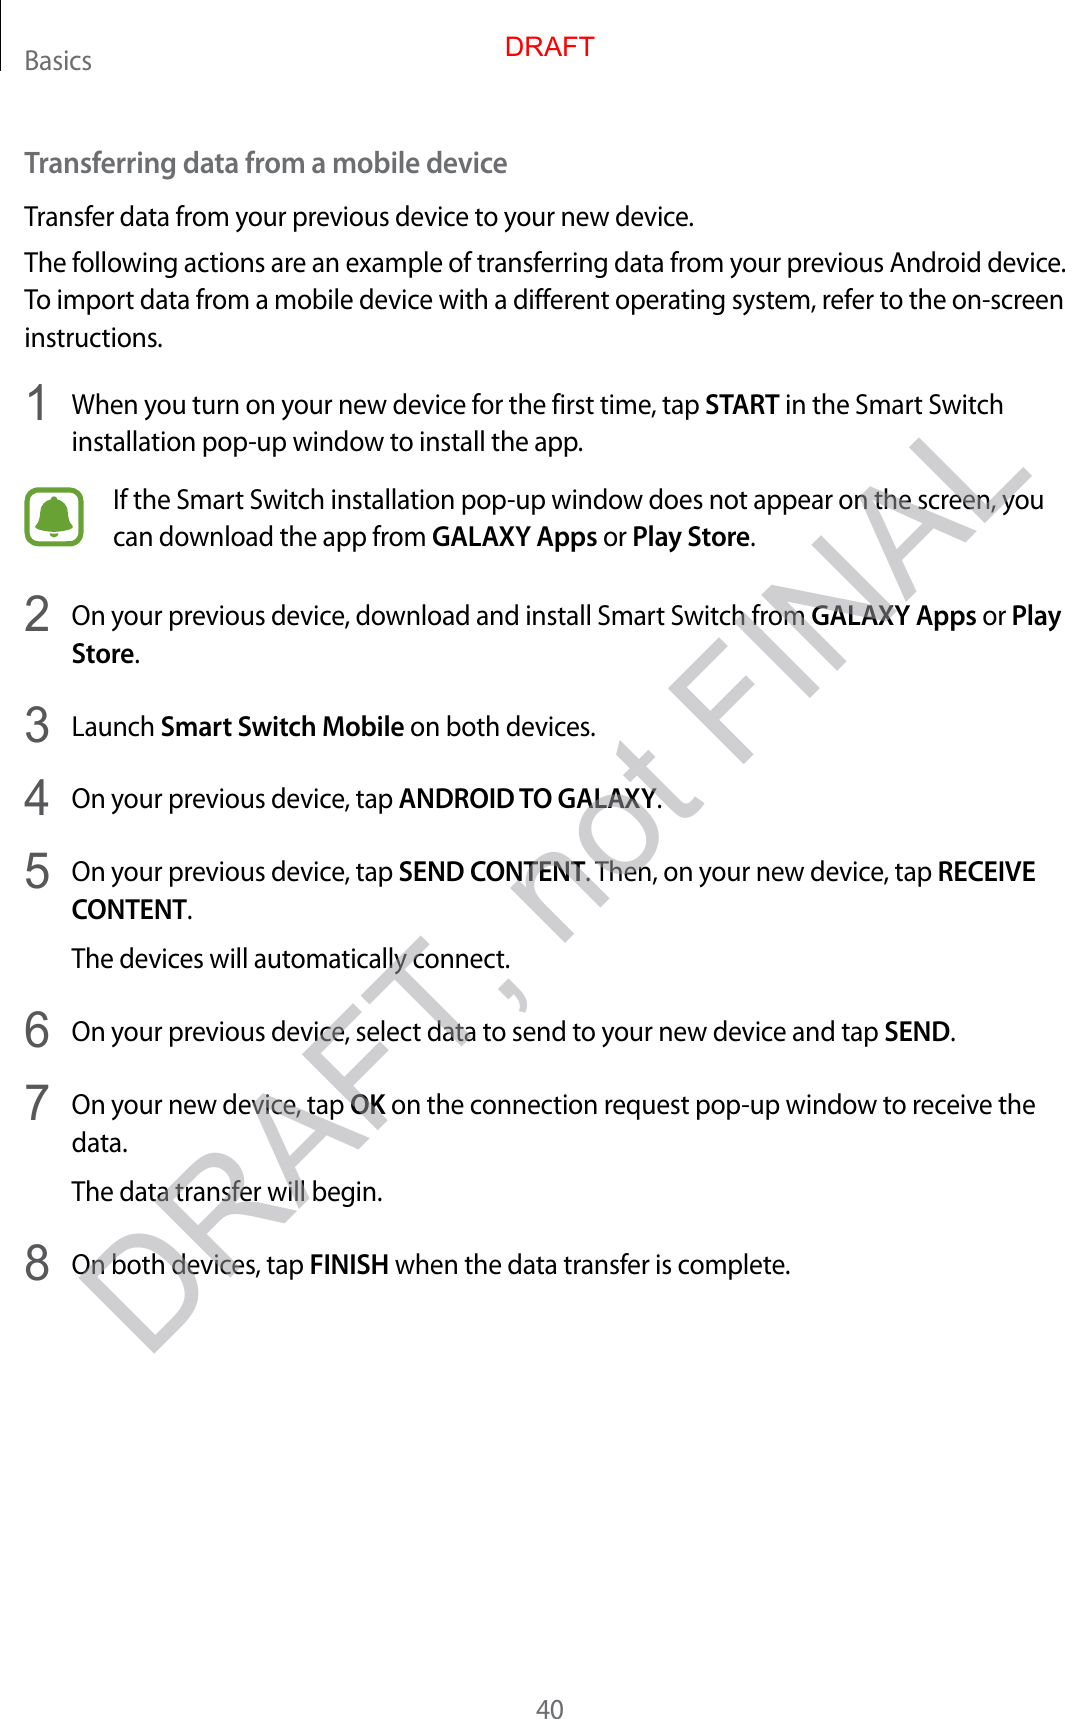 Basics40Transferring data from a mobile deviceTransfer data from your previous device to your new device.The following actions are an example of transferring data from your previous Android device. To import data from a mobile device with a different operating system, refer to the on-screen instructions.1  When you turn on your new device for the first time, tap START in the Smart Switch installation pop-up window to install the app.If the Smart Switch installation pop-up window does not appear on the screen, you can download the app from GALAXY Apps or Play Store.2  On your previous device, download and install Smart Switch from GALAXY Apps or Play Store.3  Launch Smart Switch Mobile on both devices.4  On your previous device, tap ANDROID TO GALAXY.5  On your previous device, tap SEND CONTENT. Then, on your new device, tap RECEIVE CONTENT.The devices will automatically connect.6  On your previous device, select data to send to your new device and tap SEND.7  On your new device, tap OK on the connection request pop-up window to receive the data.The data transfer will begin.8  On both devices, tap FINISH when the data transfer is complete.DRAFTDRAFT, not FINAL